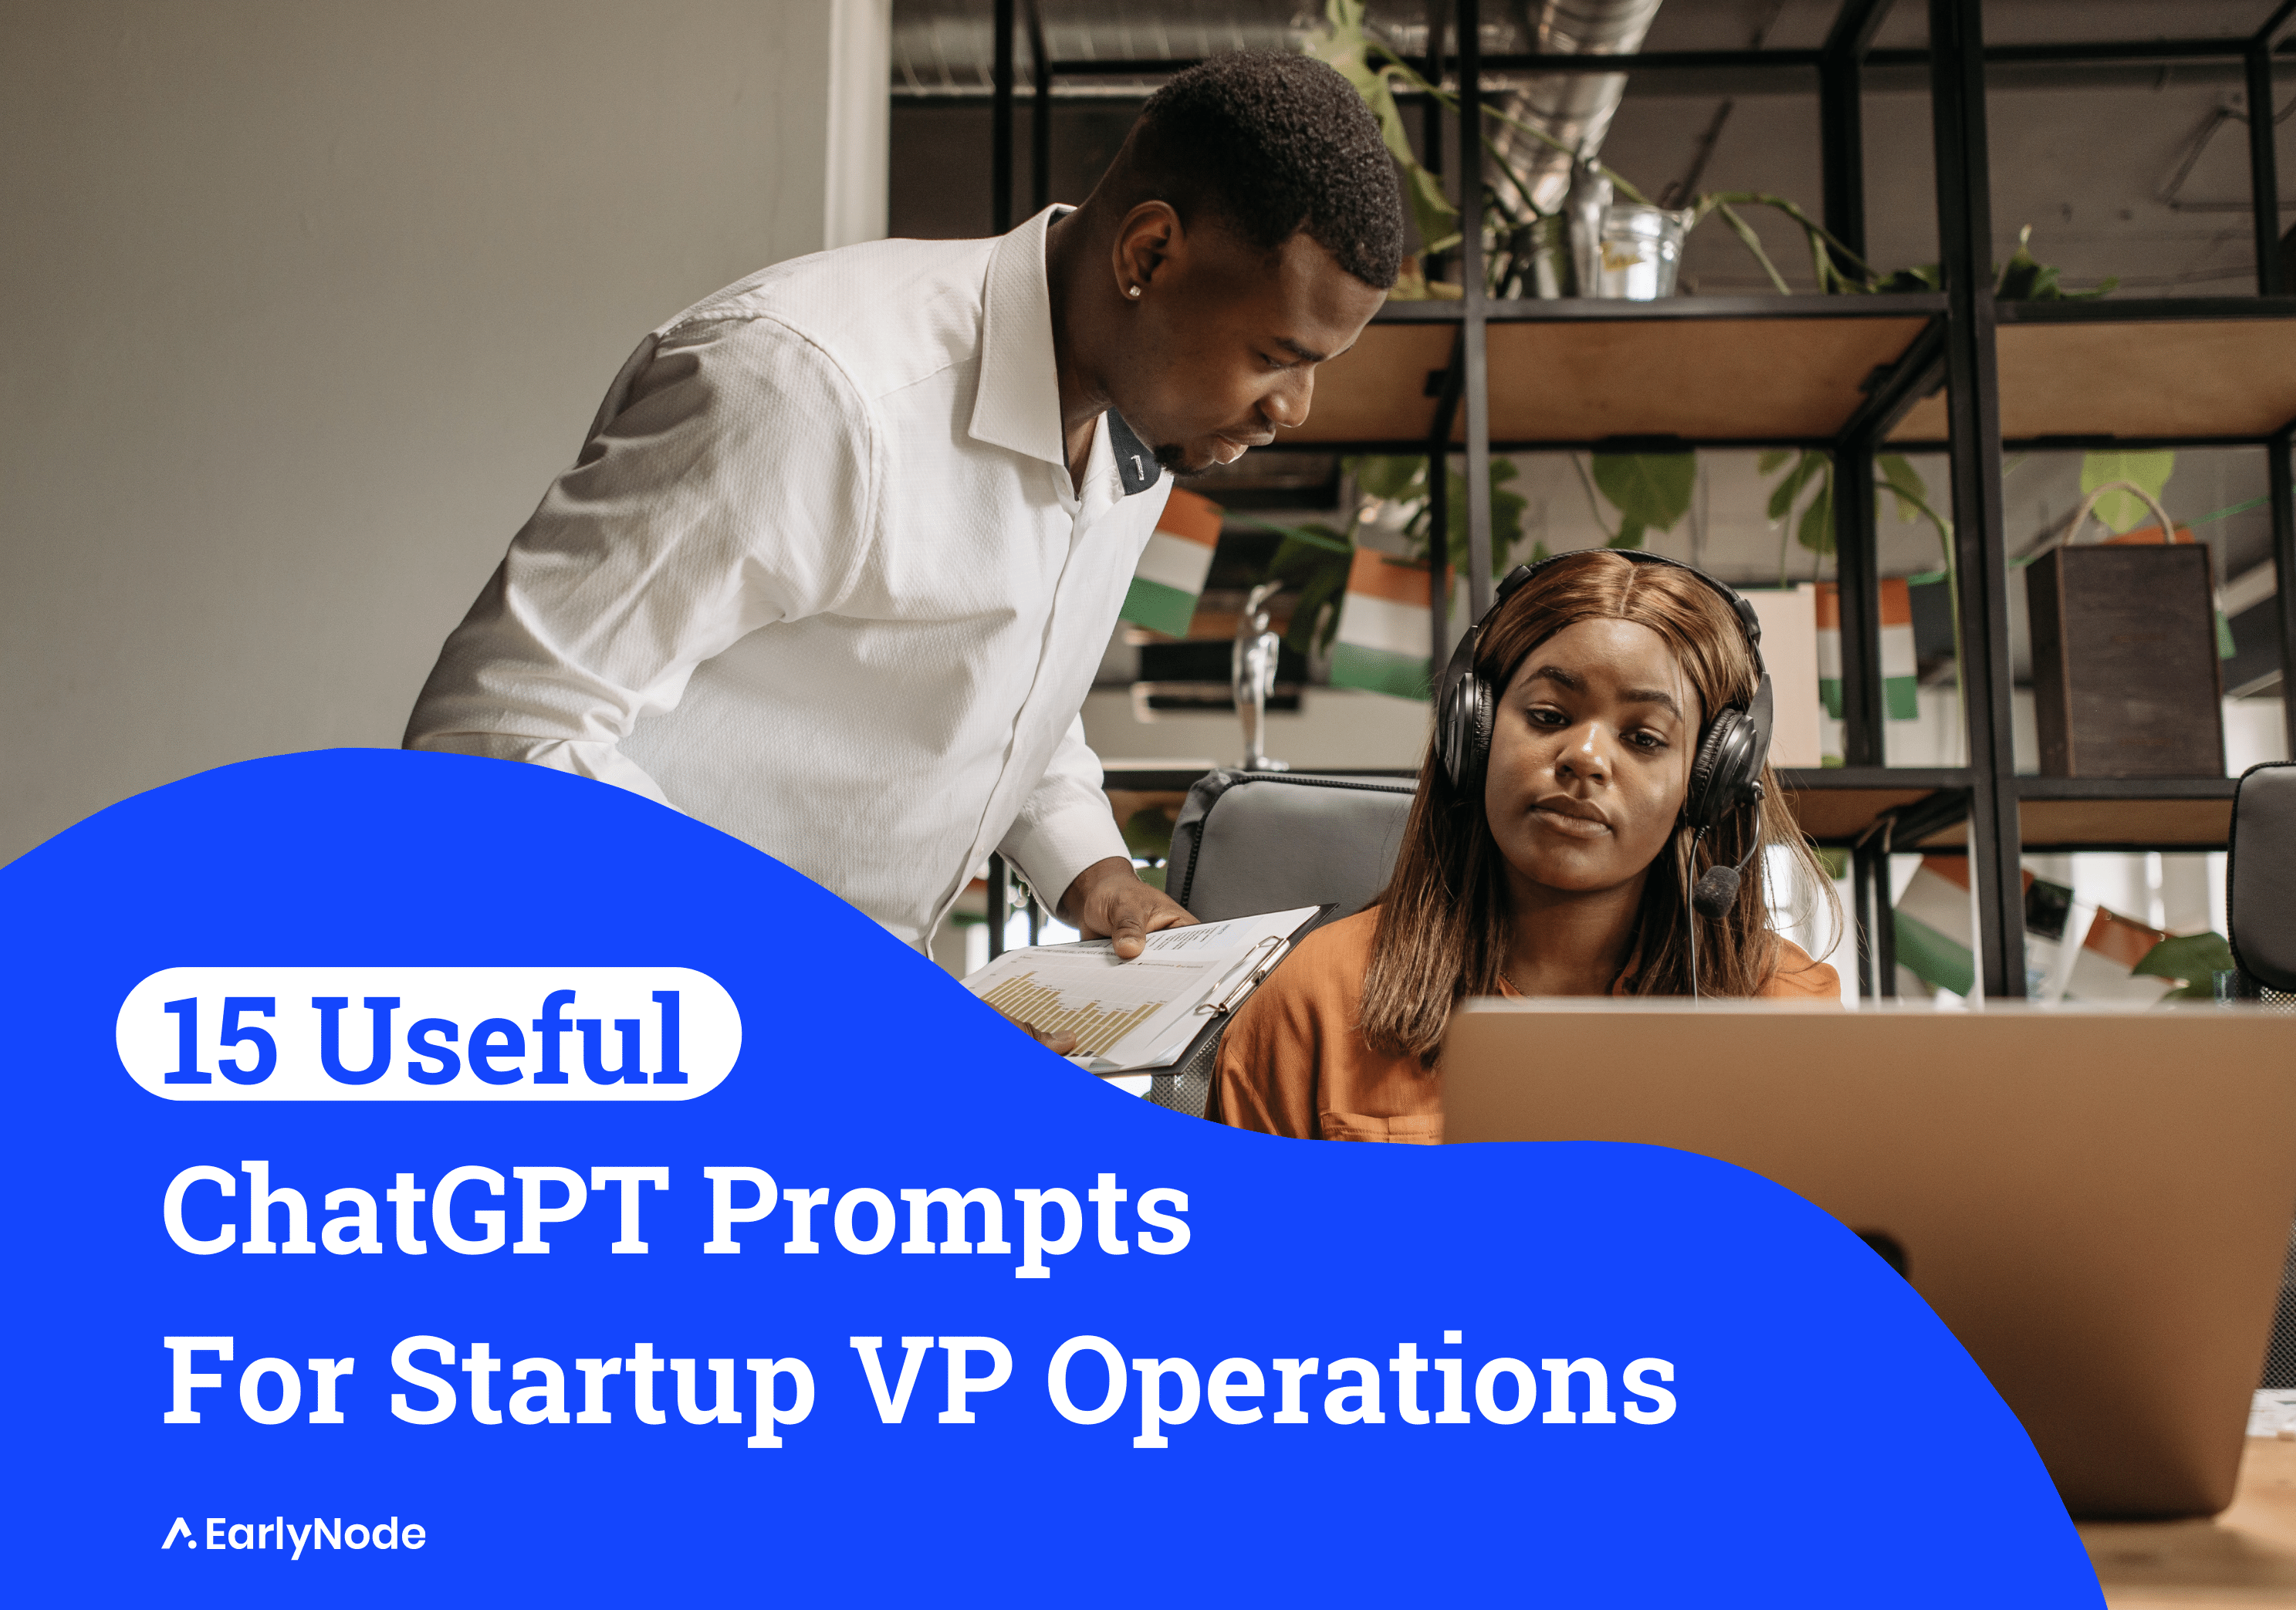 15 Useful ChatGPT Prompts For VP Operations